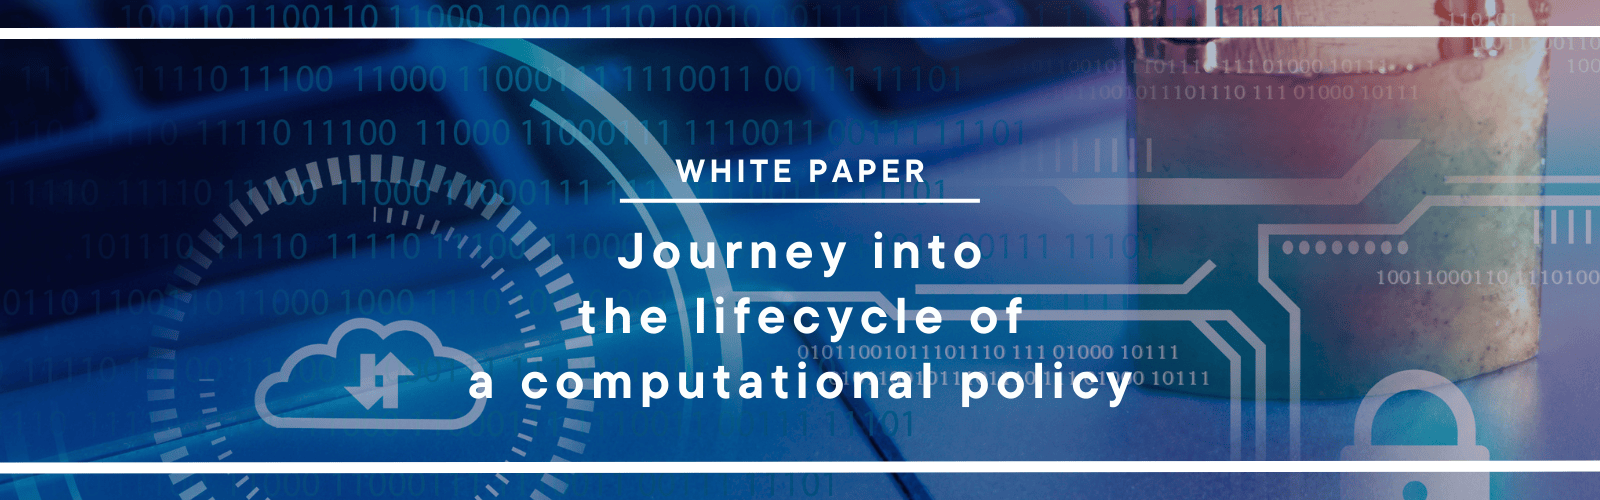 Journey into the lifecycle of a computational policy. The white paper includes what a computational policy is and does.